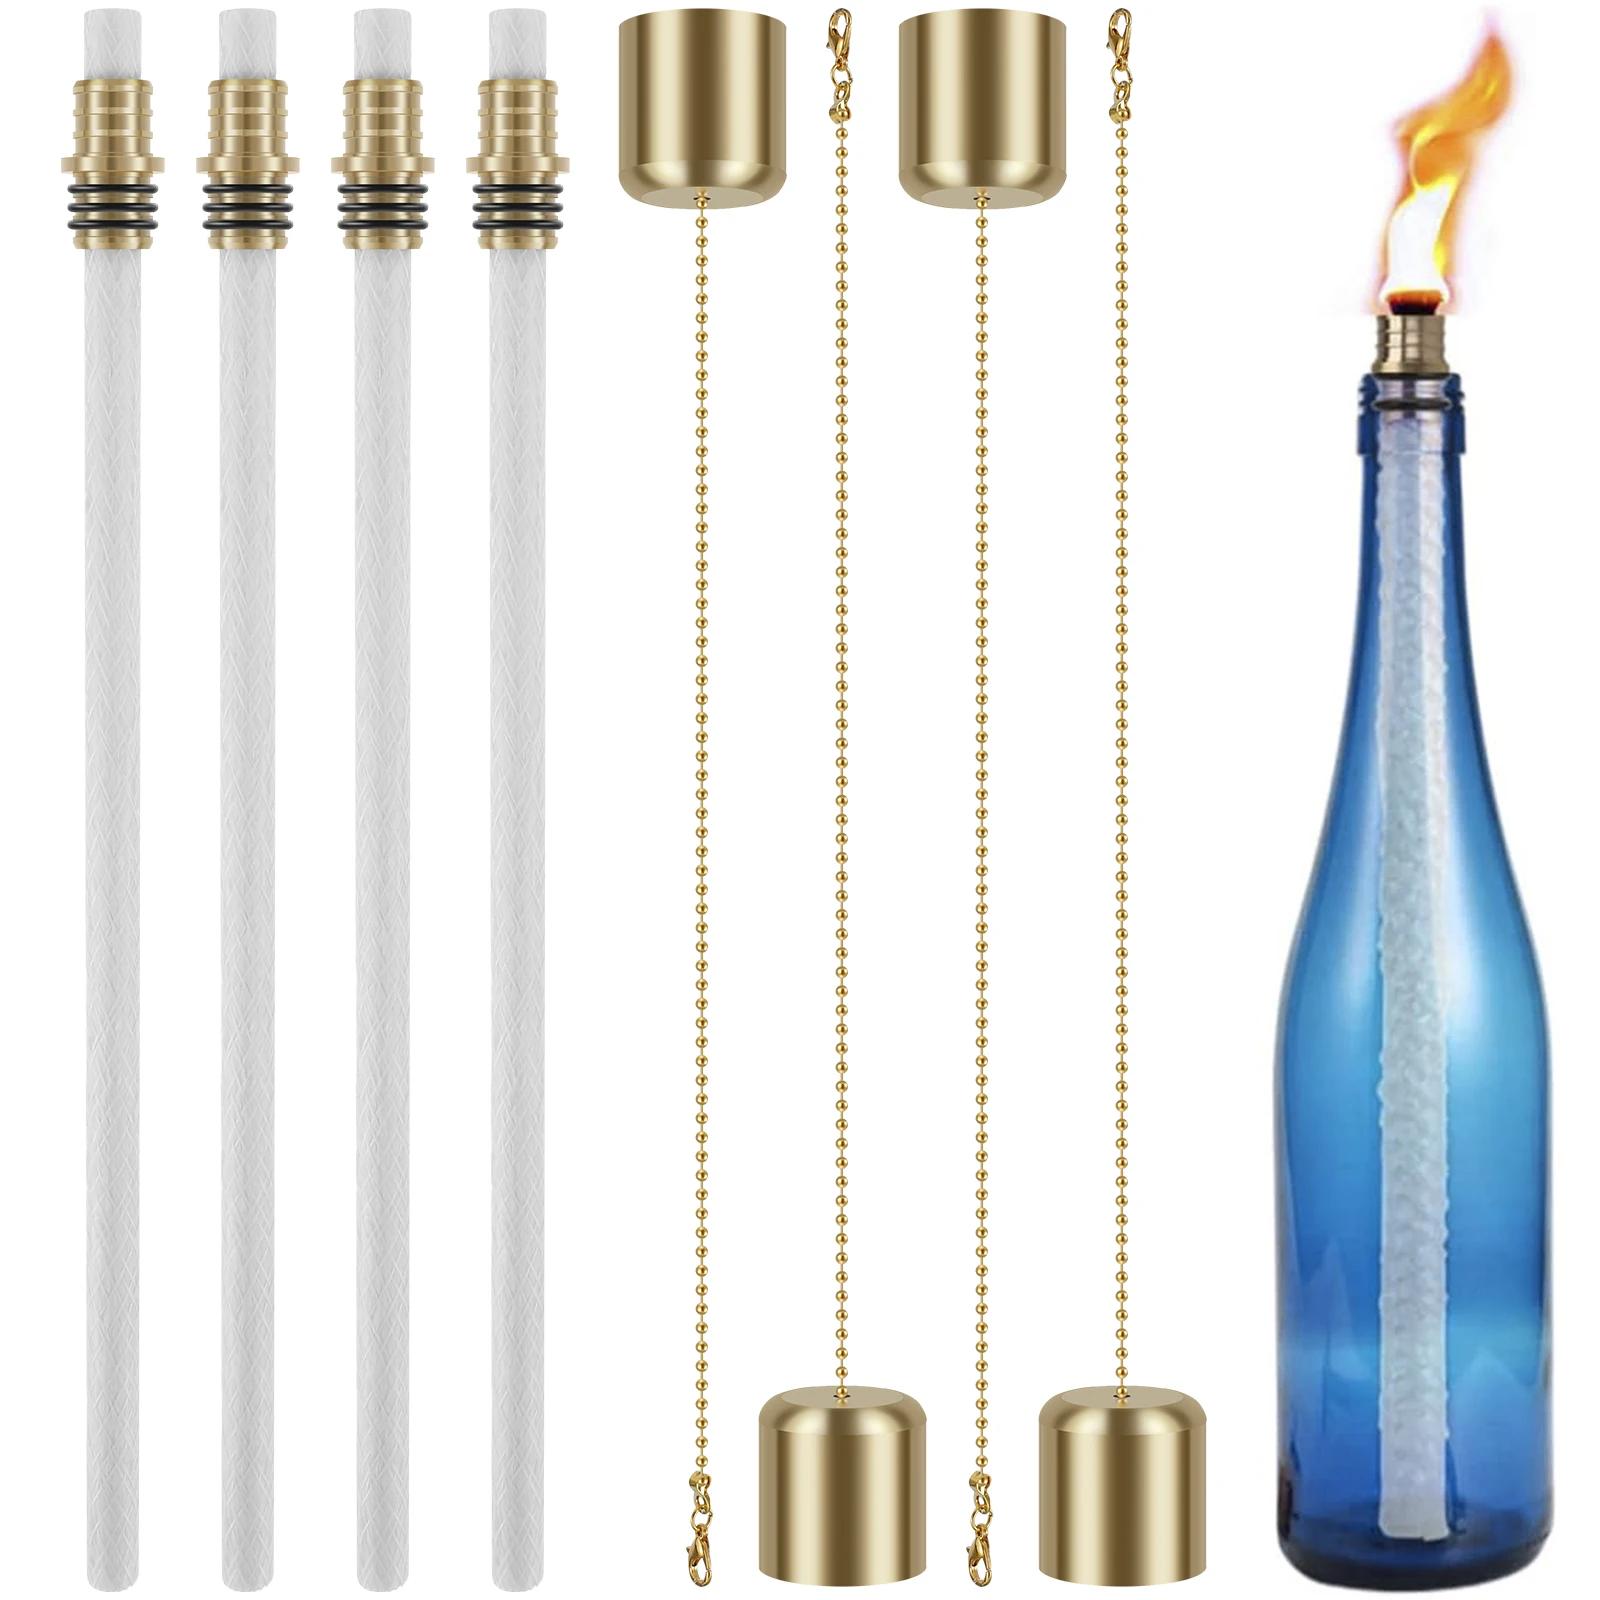 

12Pcs Wine Bottle Torch Kit Durable Torch Light Set with 4 Torch Wicks 4 Brass Torch Wick Holders and 4 Brass Covers Premium DIY